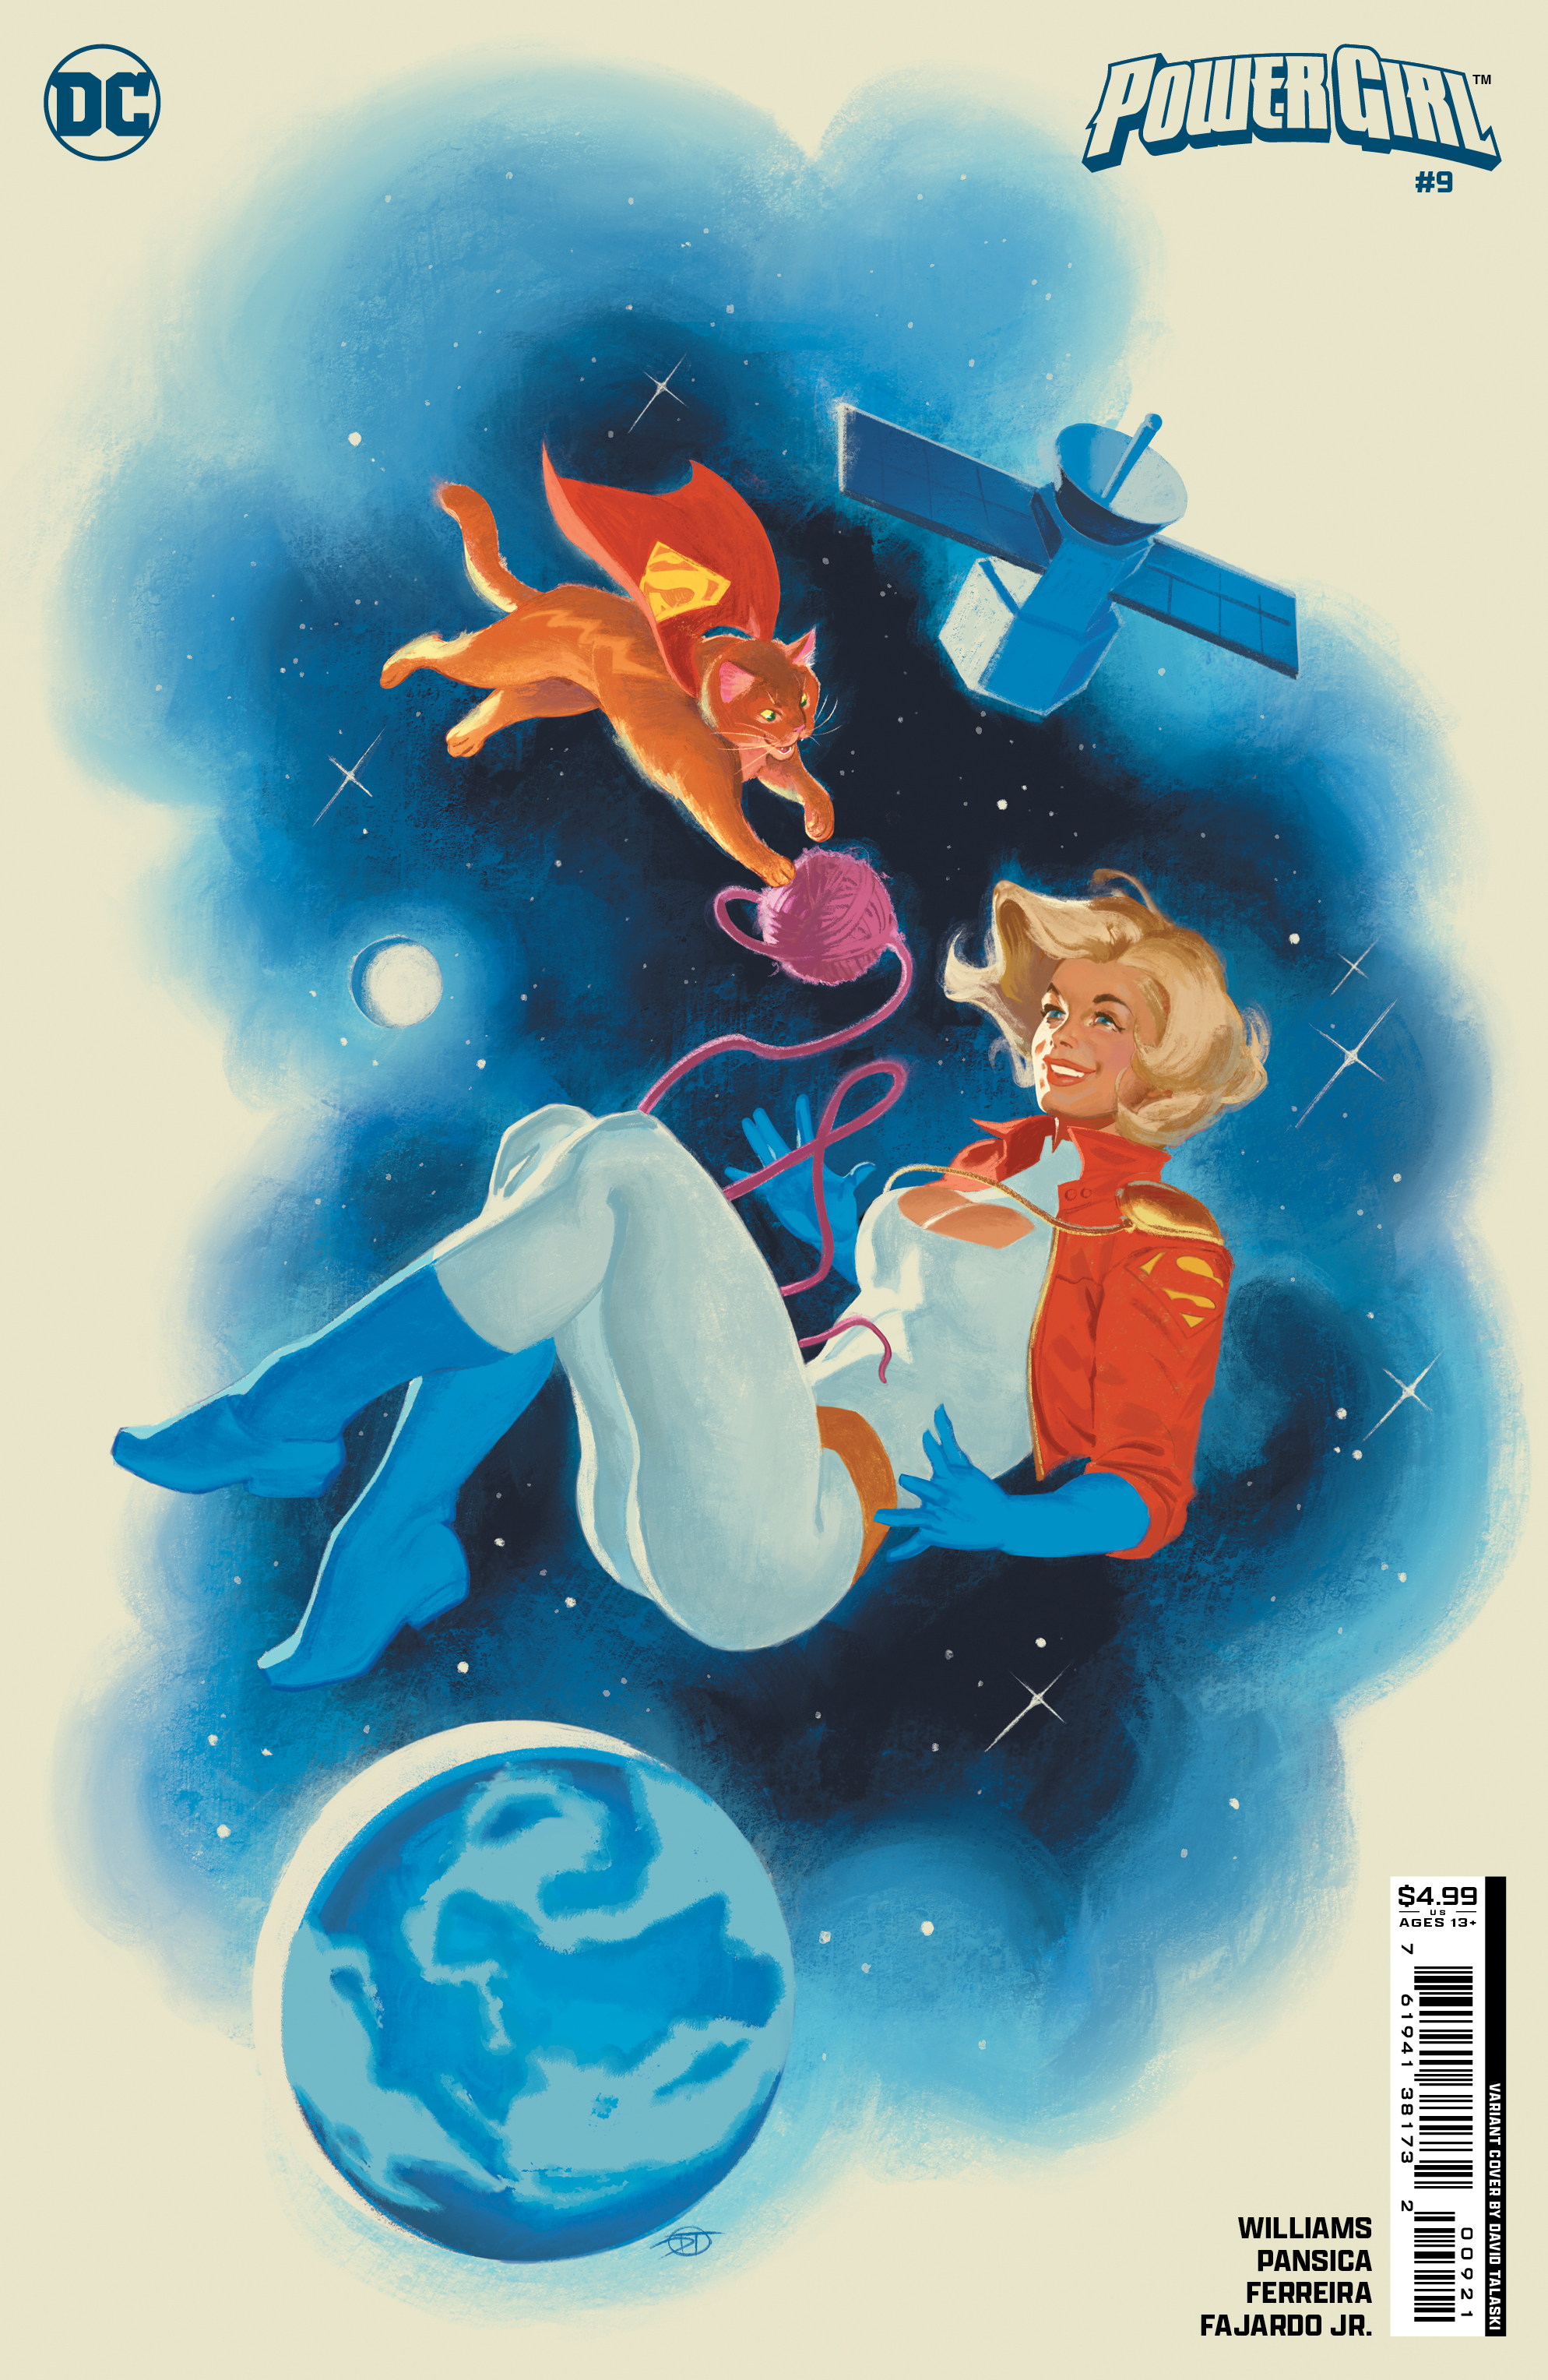 Covers from Power Girl #9